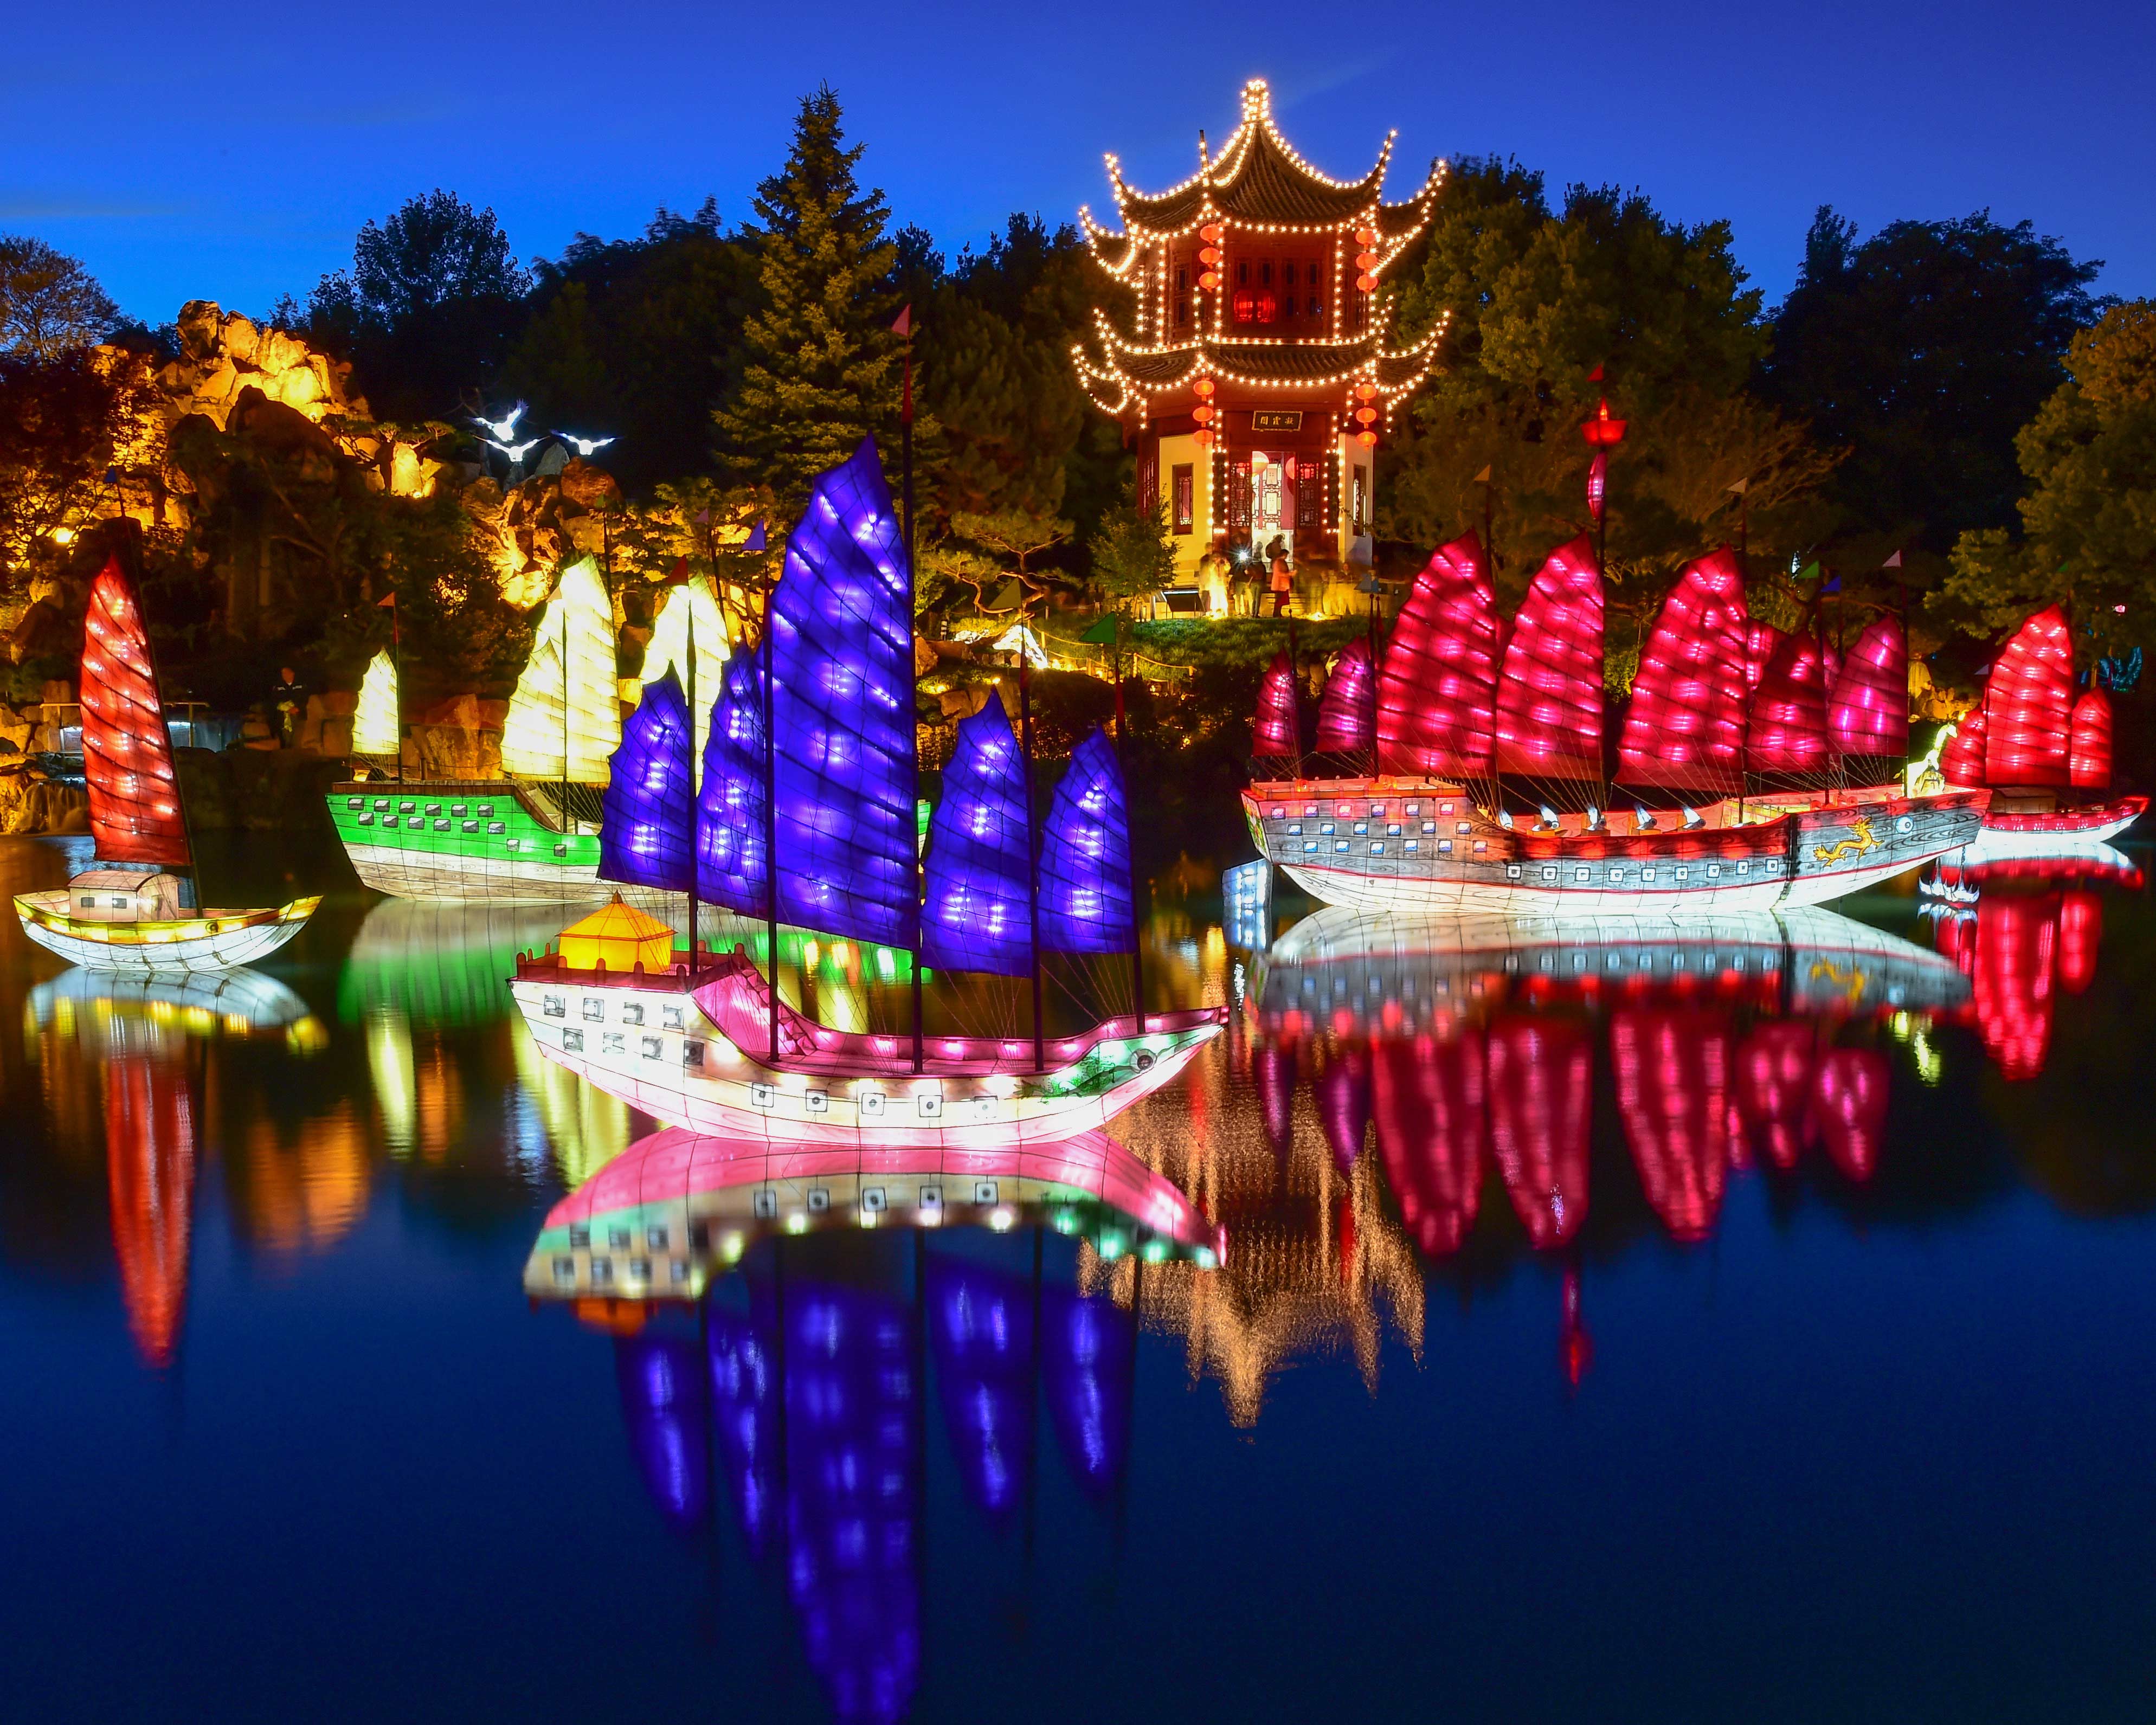 Montreal Travel Guide: lit up colored boats on a lake.